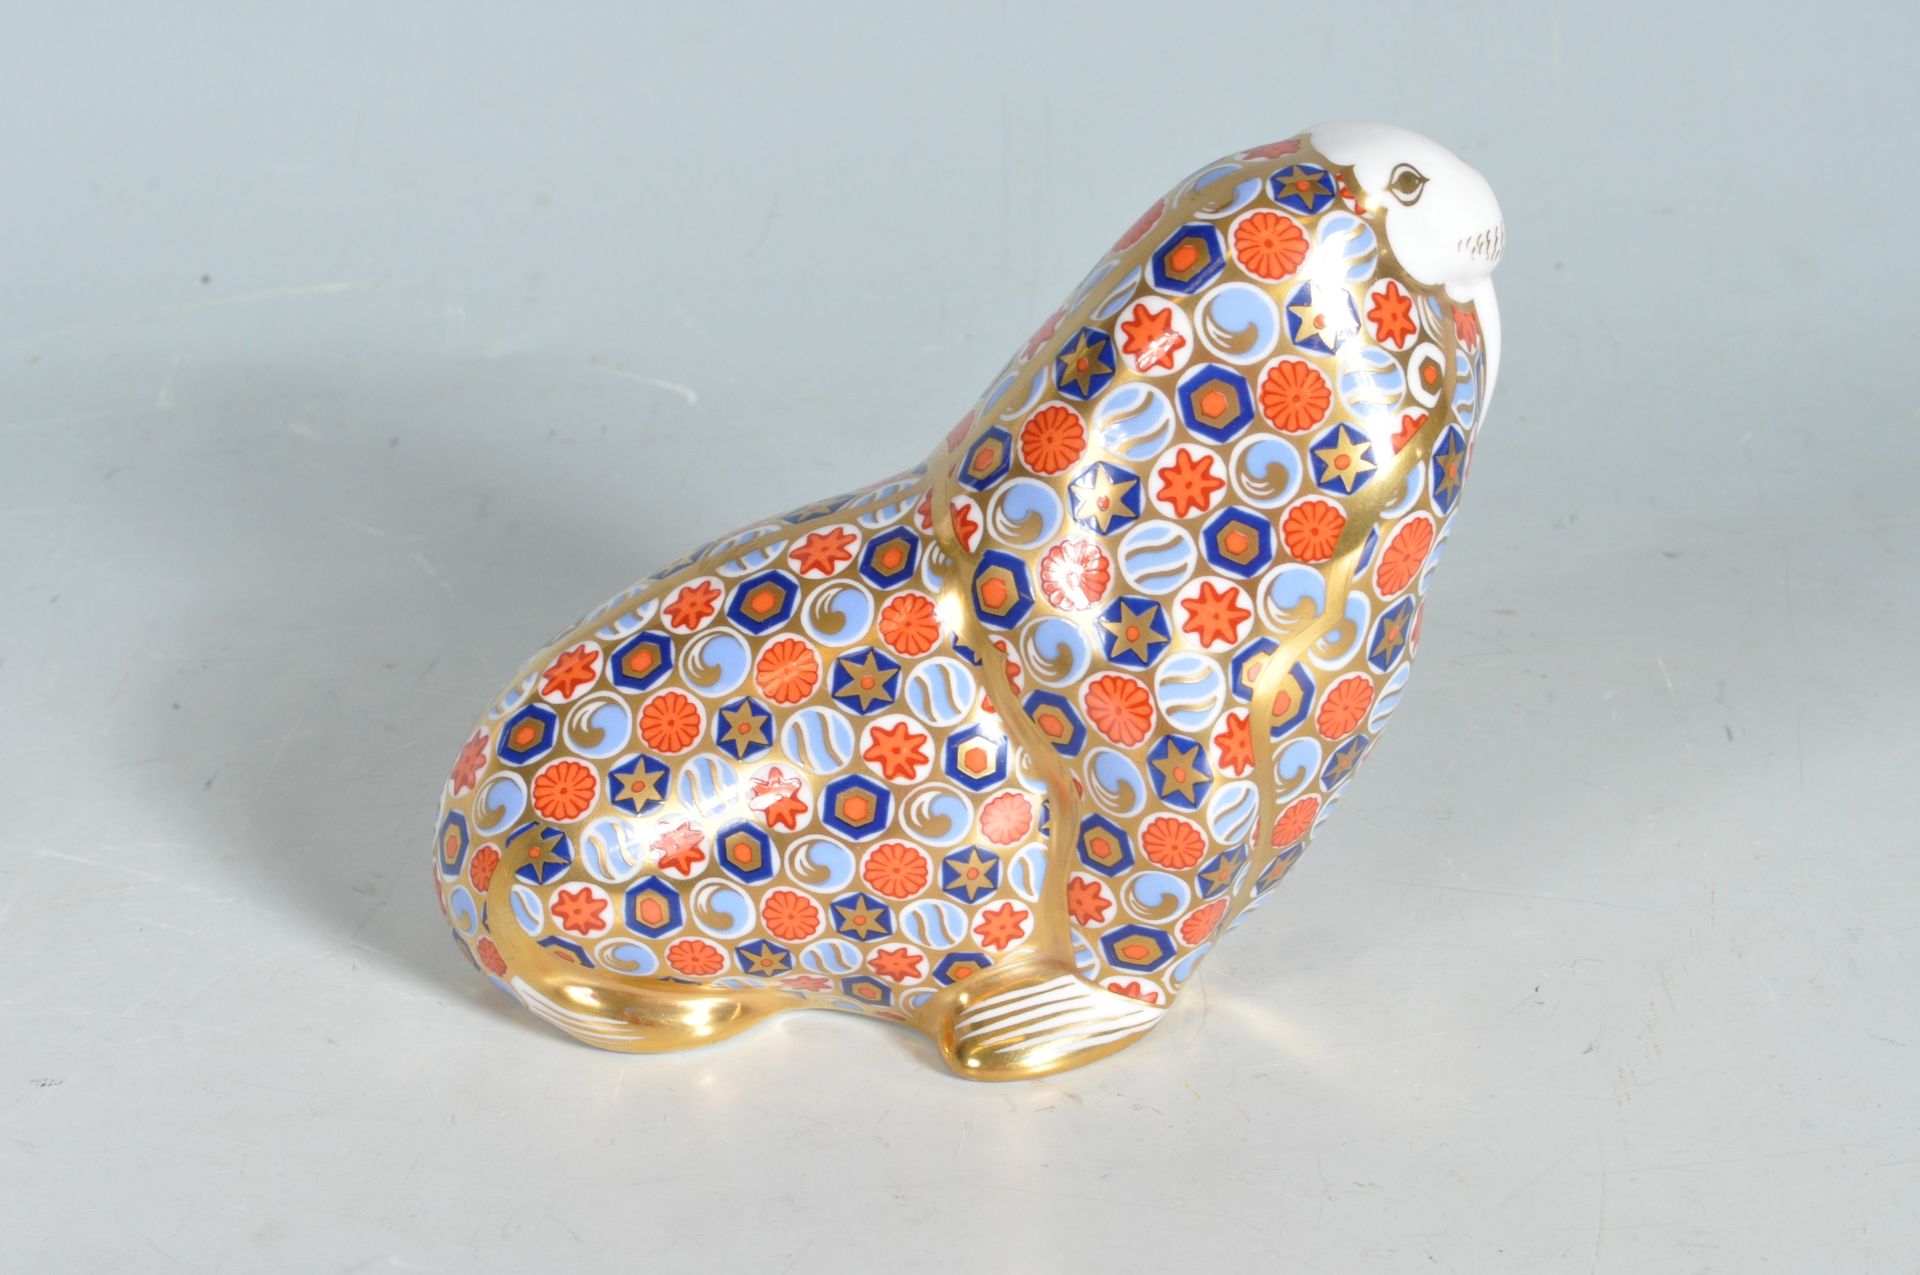 ROYAL CROWN DERBY WALRUS PAPERWEIGHT FIGURINE - Image 3 of 6